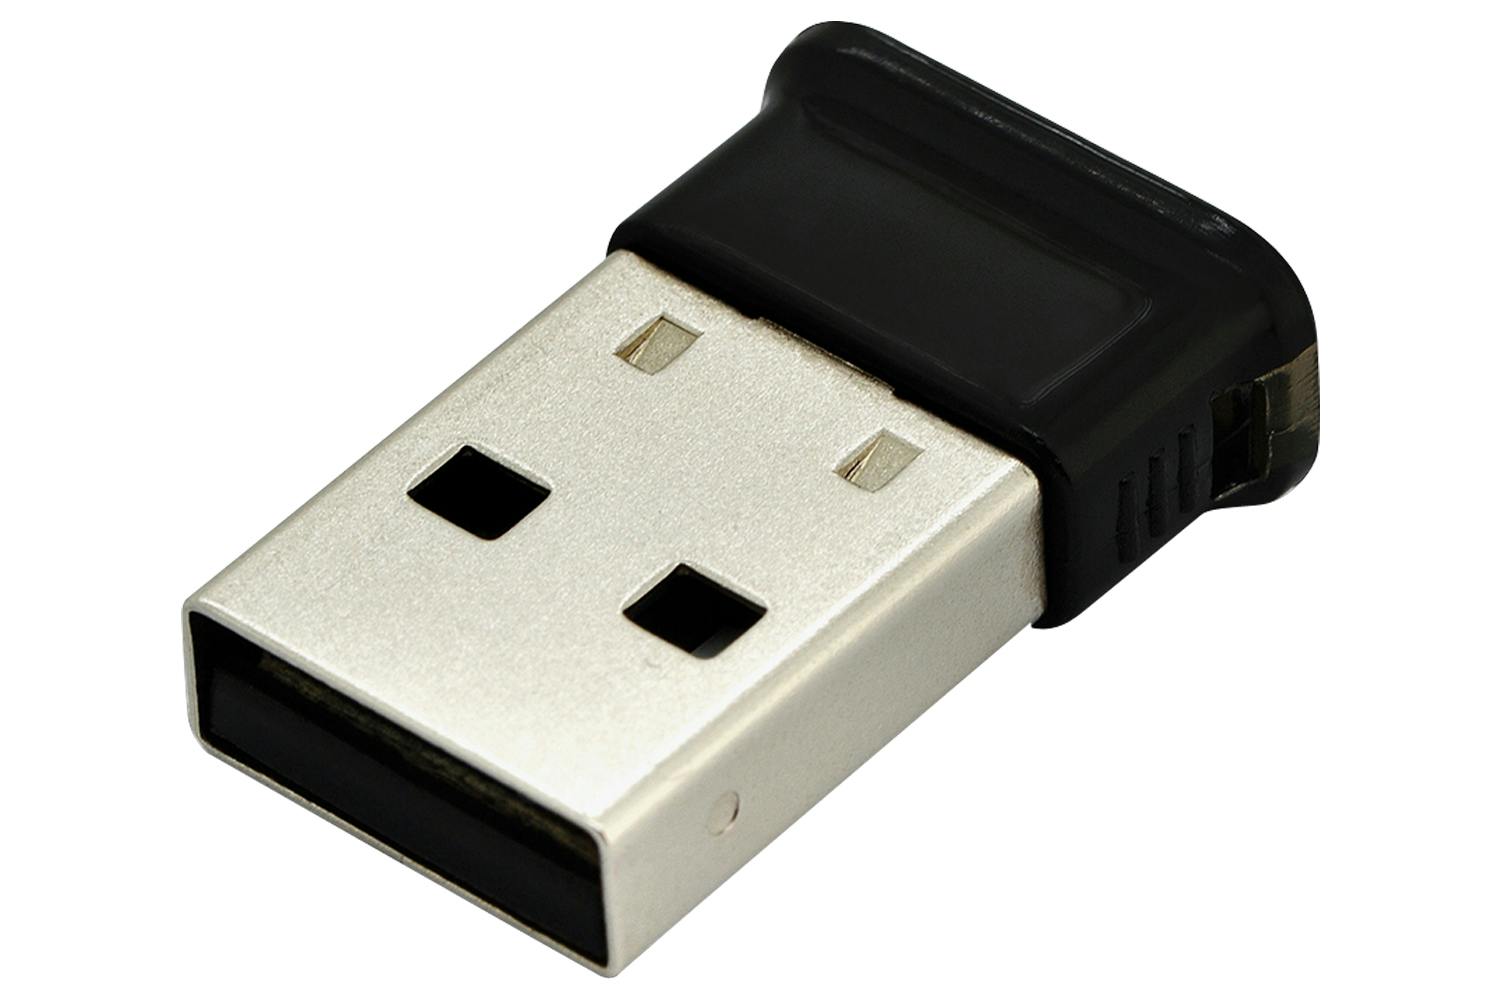 USB and bluetooth Adapter between controllers and PC or Android Devices -  Kelly Controls